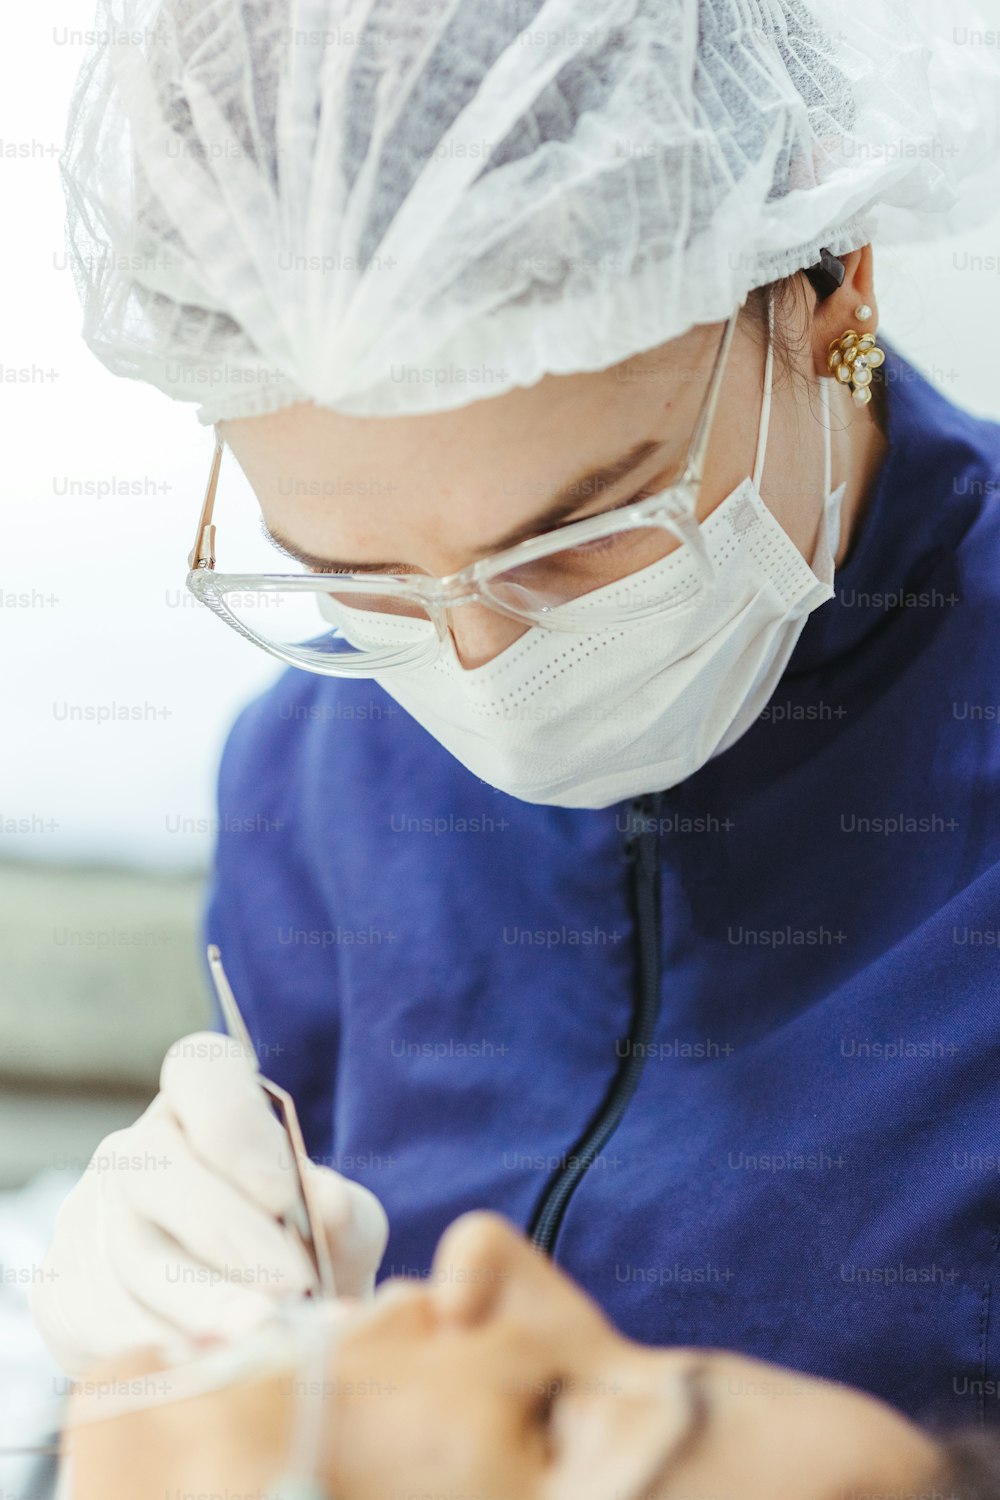 a woman in a surgical mask is doing something